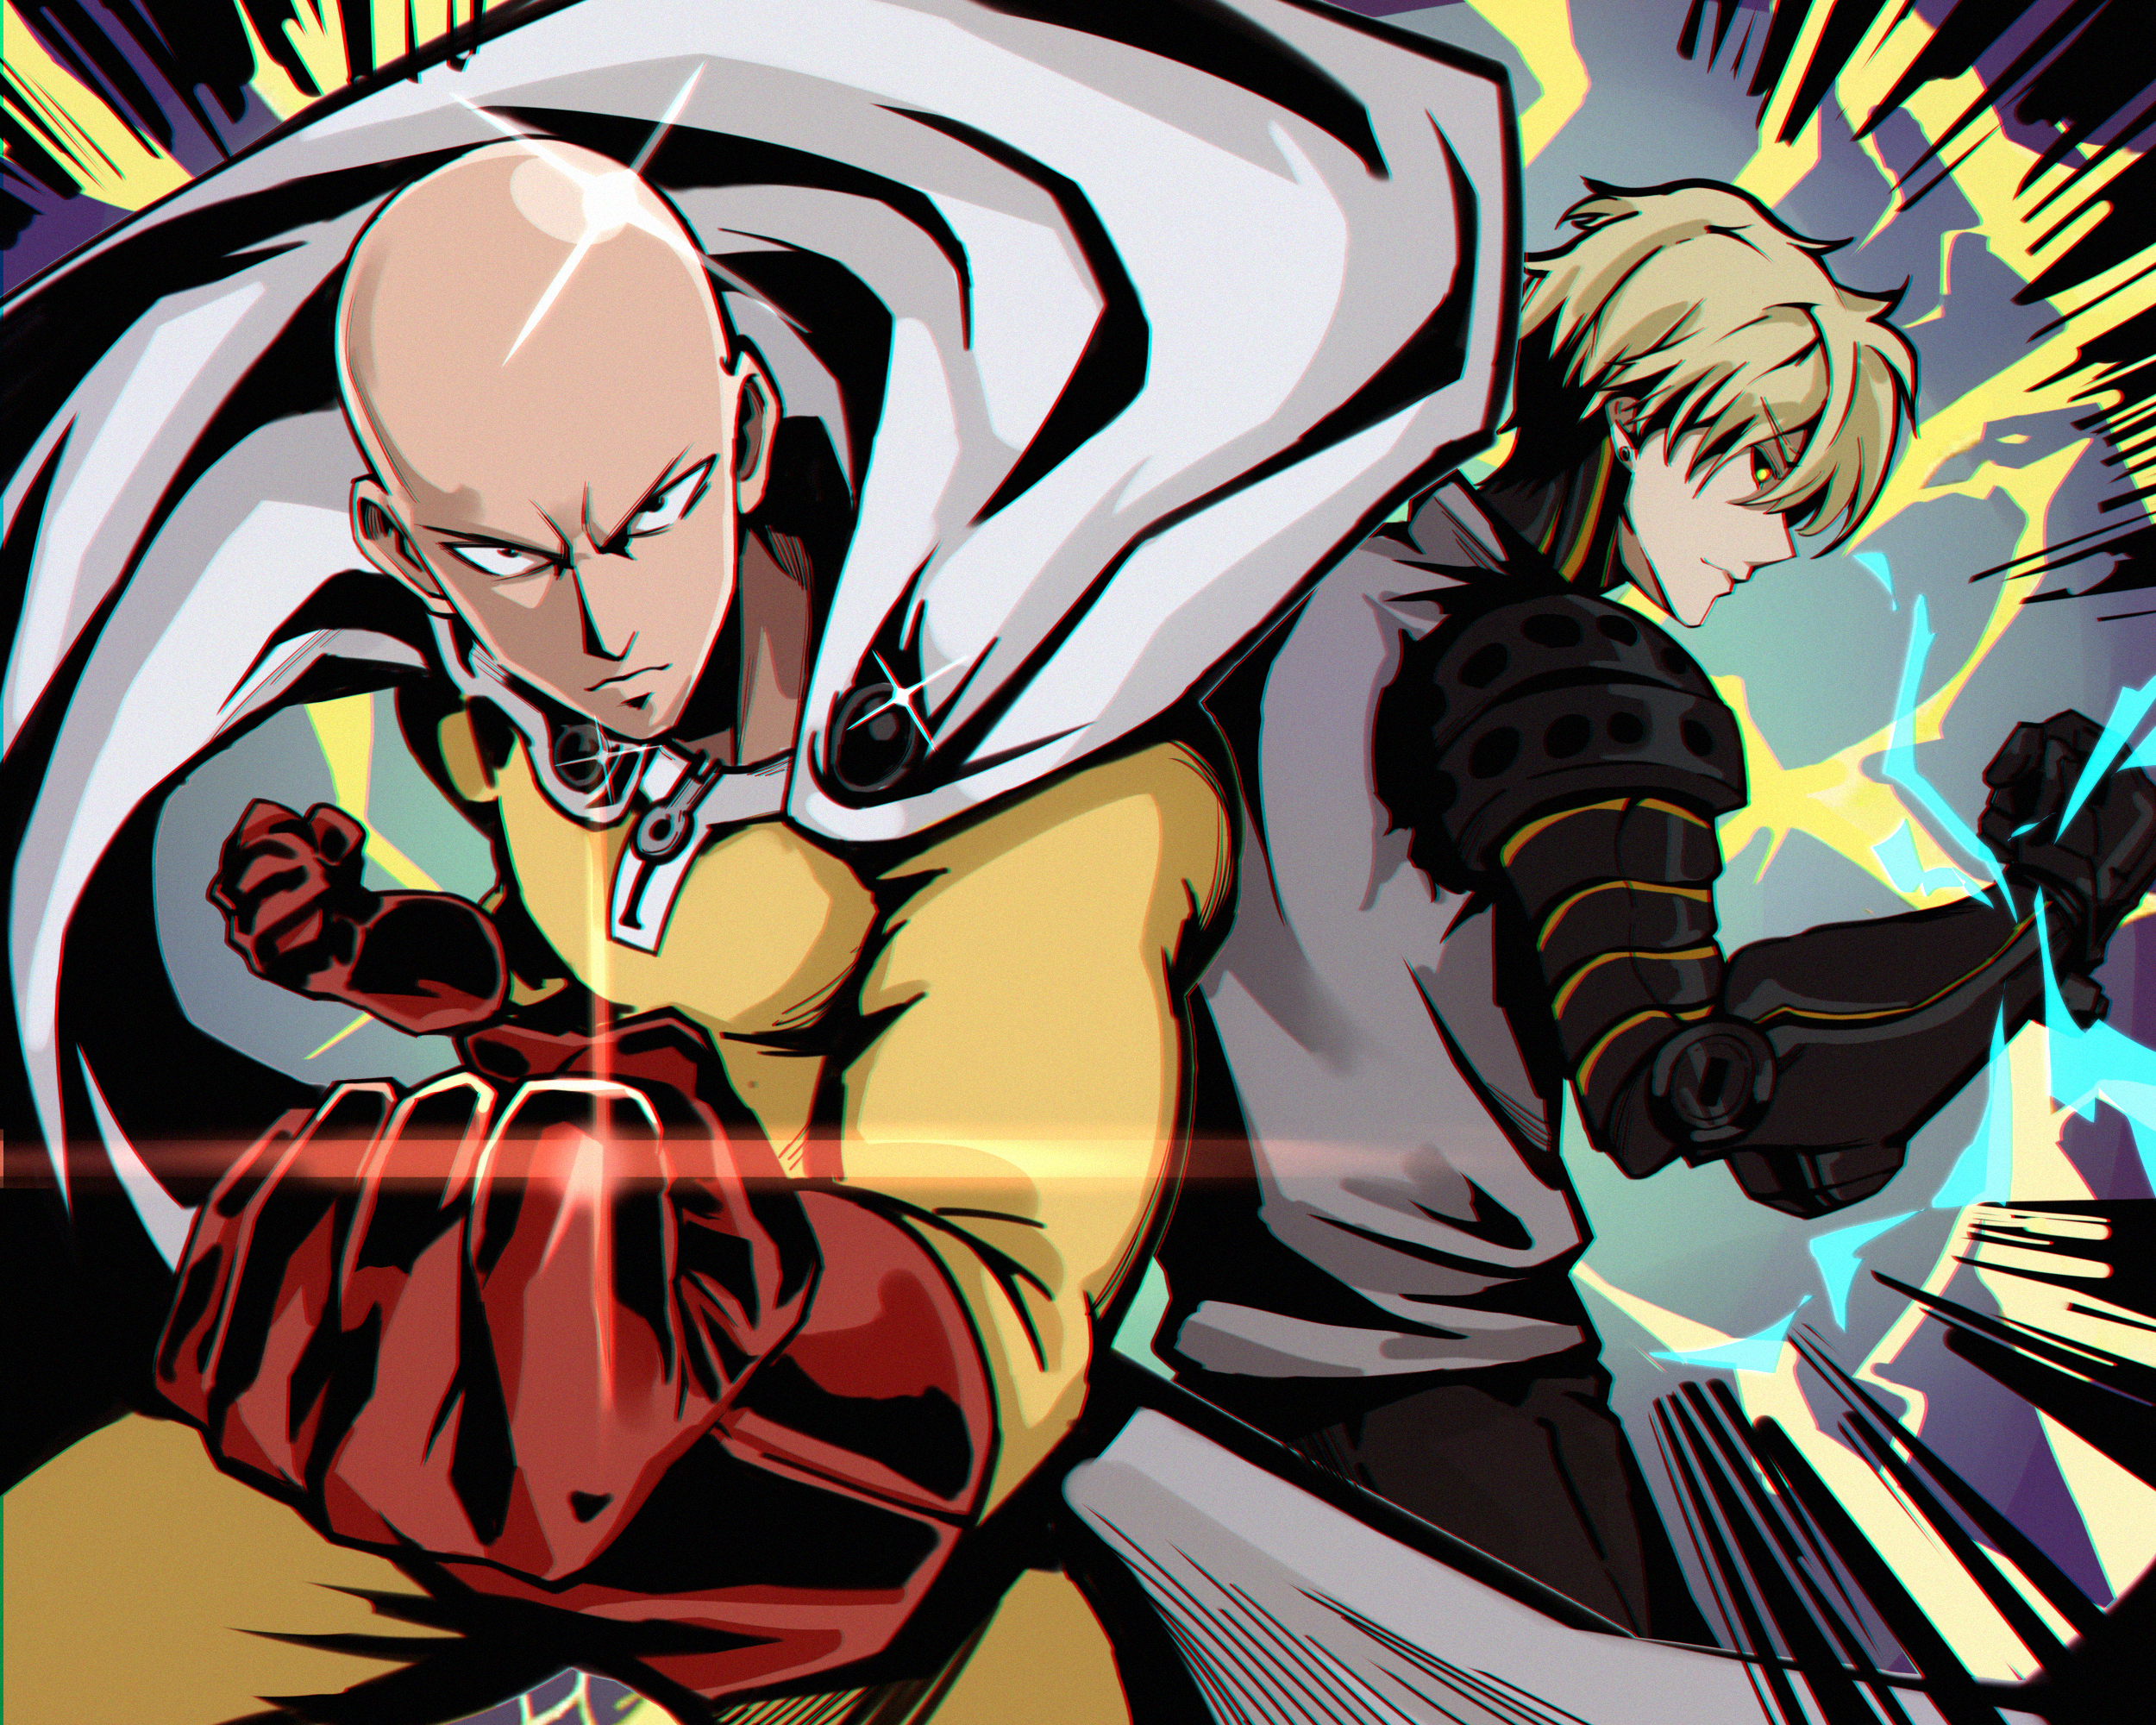 one-punch-man